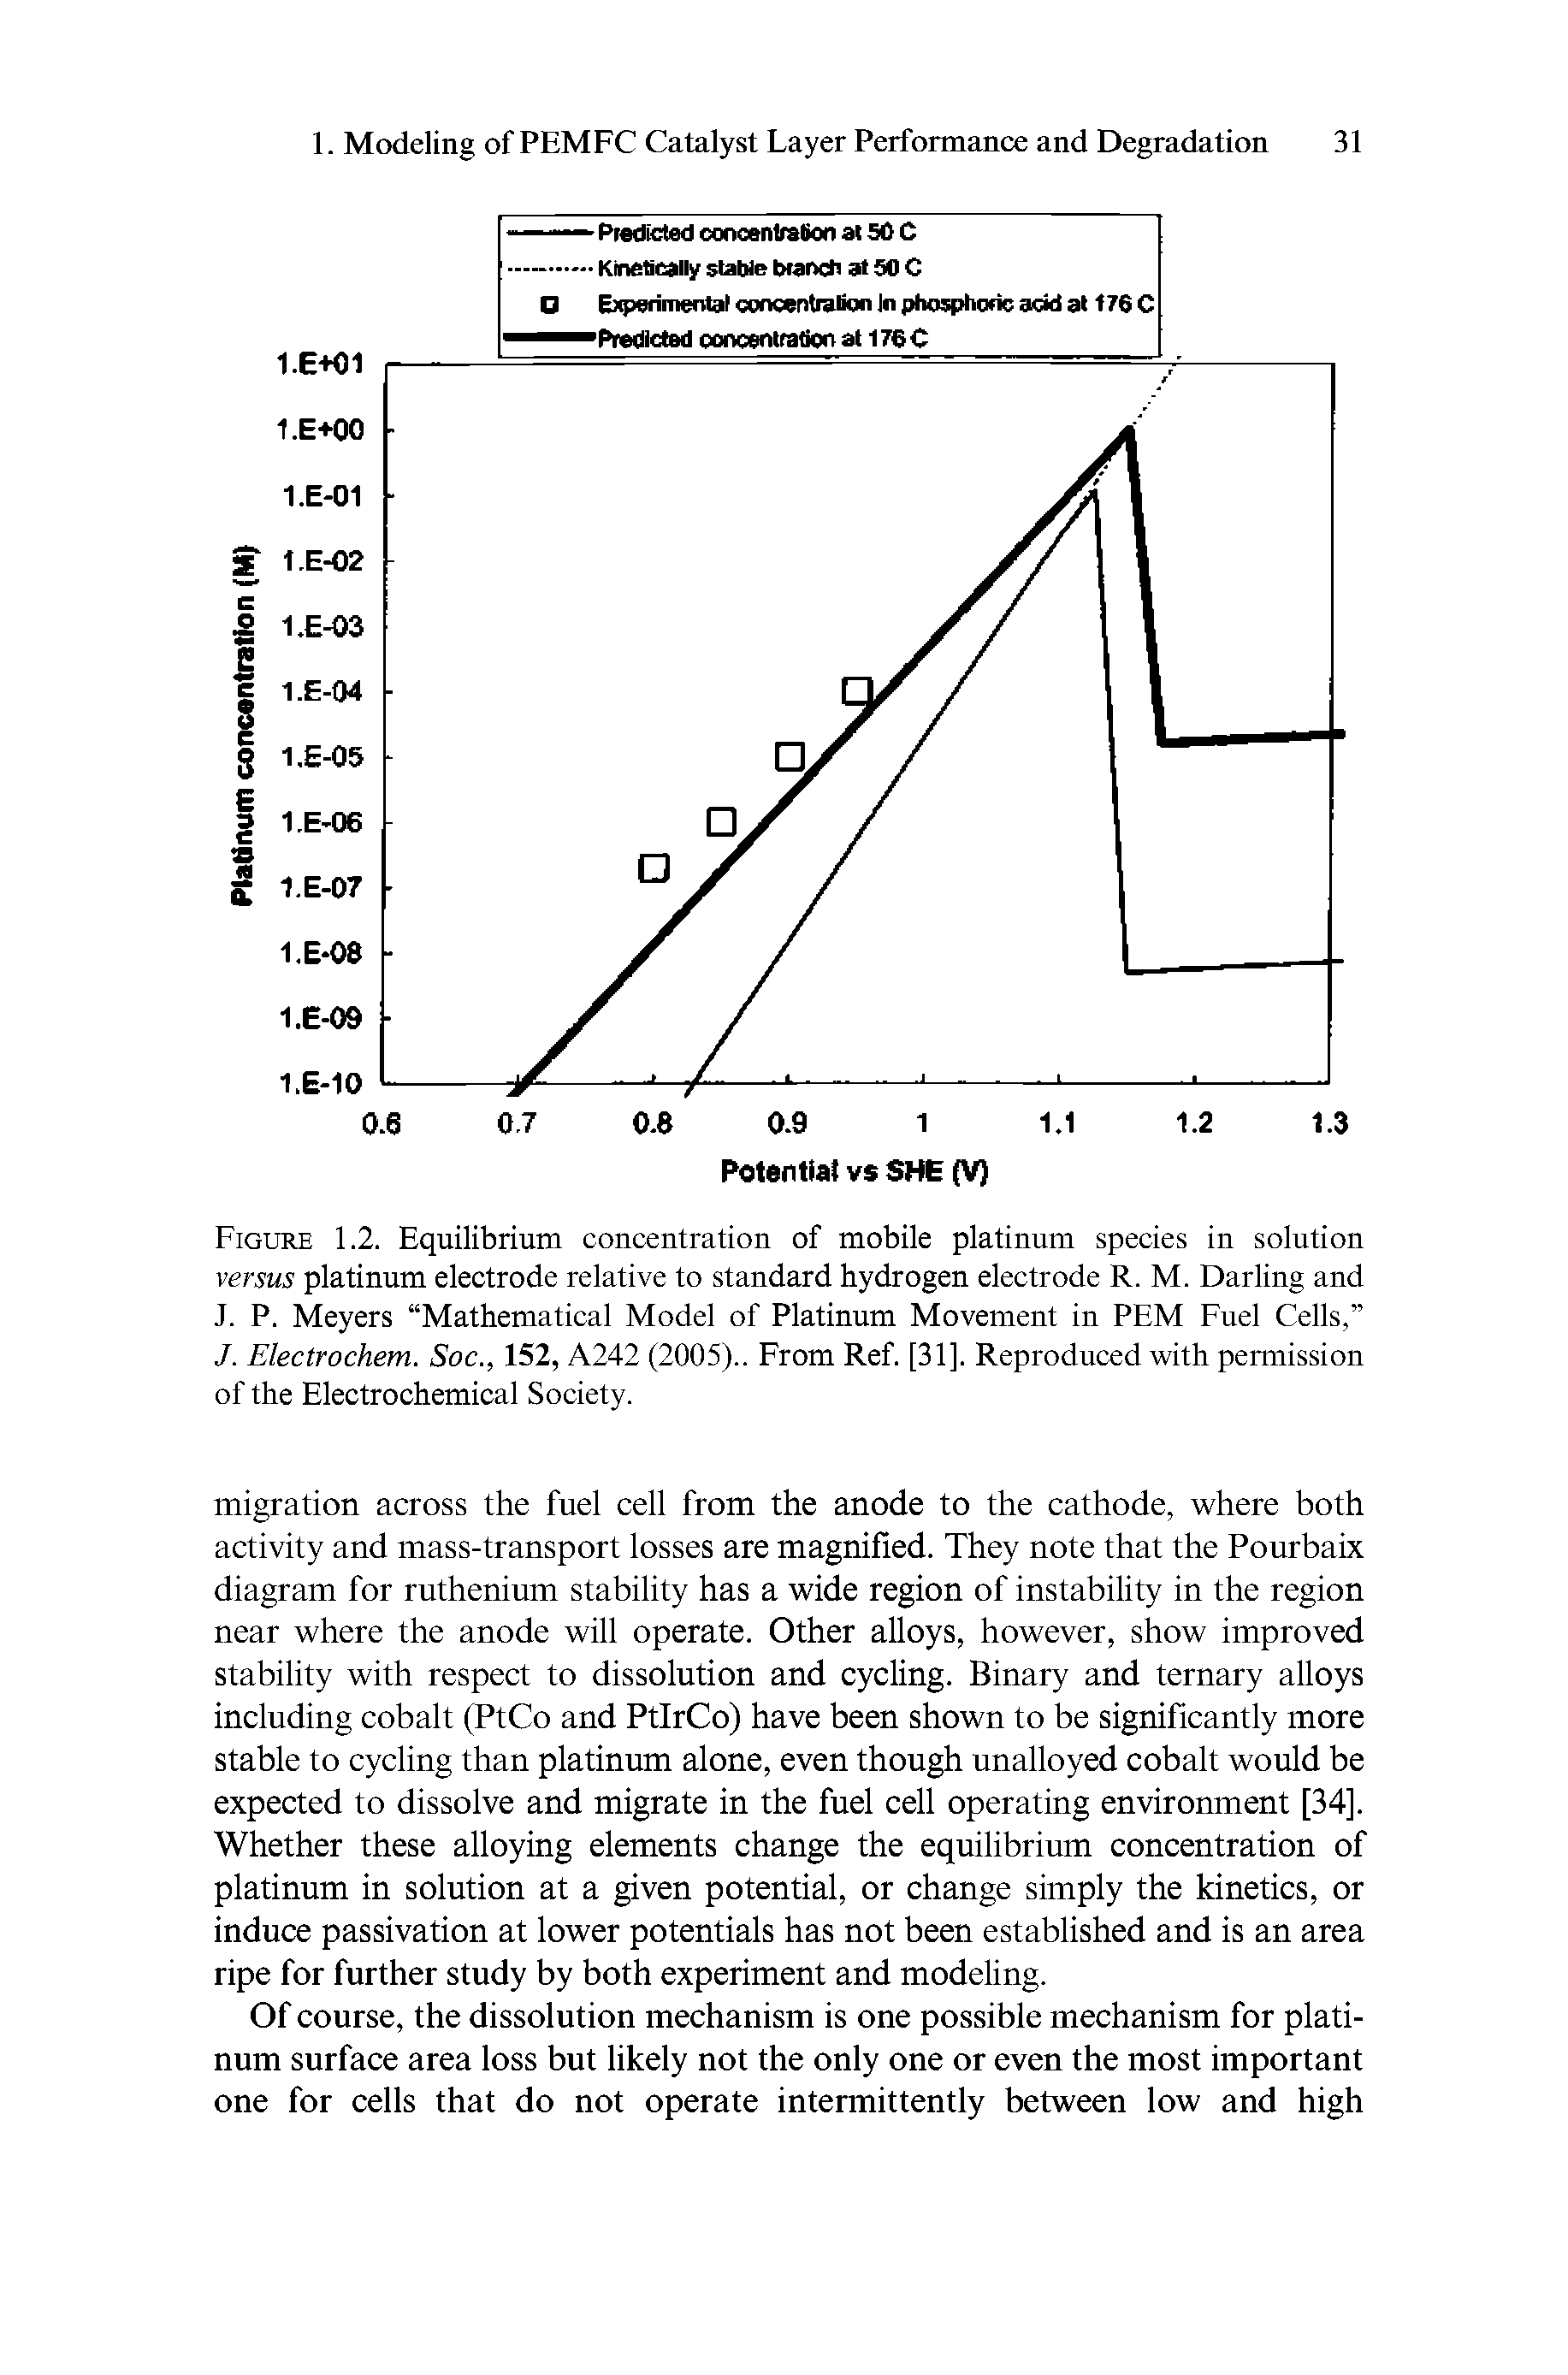 Figure 1.2. Equilibrium concentration of mobile platinum species in solution versus platinum electrode relative to standard hydrogen electrode R. M. Darling and J. P. Meyers Mathematical Model of Platinum Movement in PEM Fuel Cells, J. Electrochem. Soc., 152, A242 (2005).. From Ref. [31]. Reproduced with permission of the Electrochemical Society.